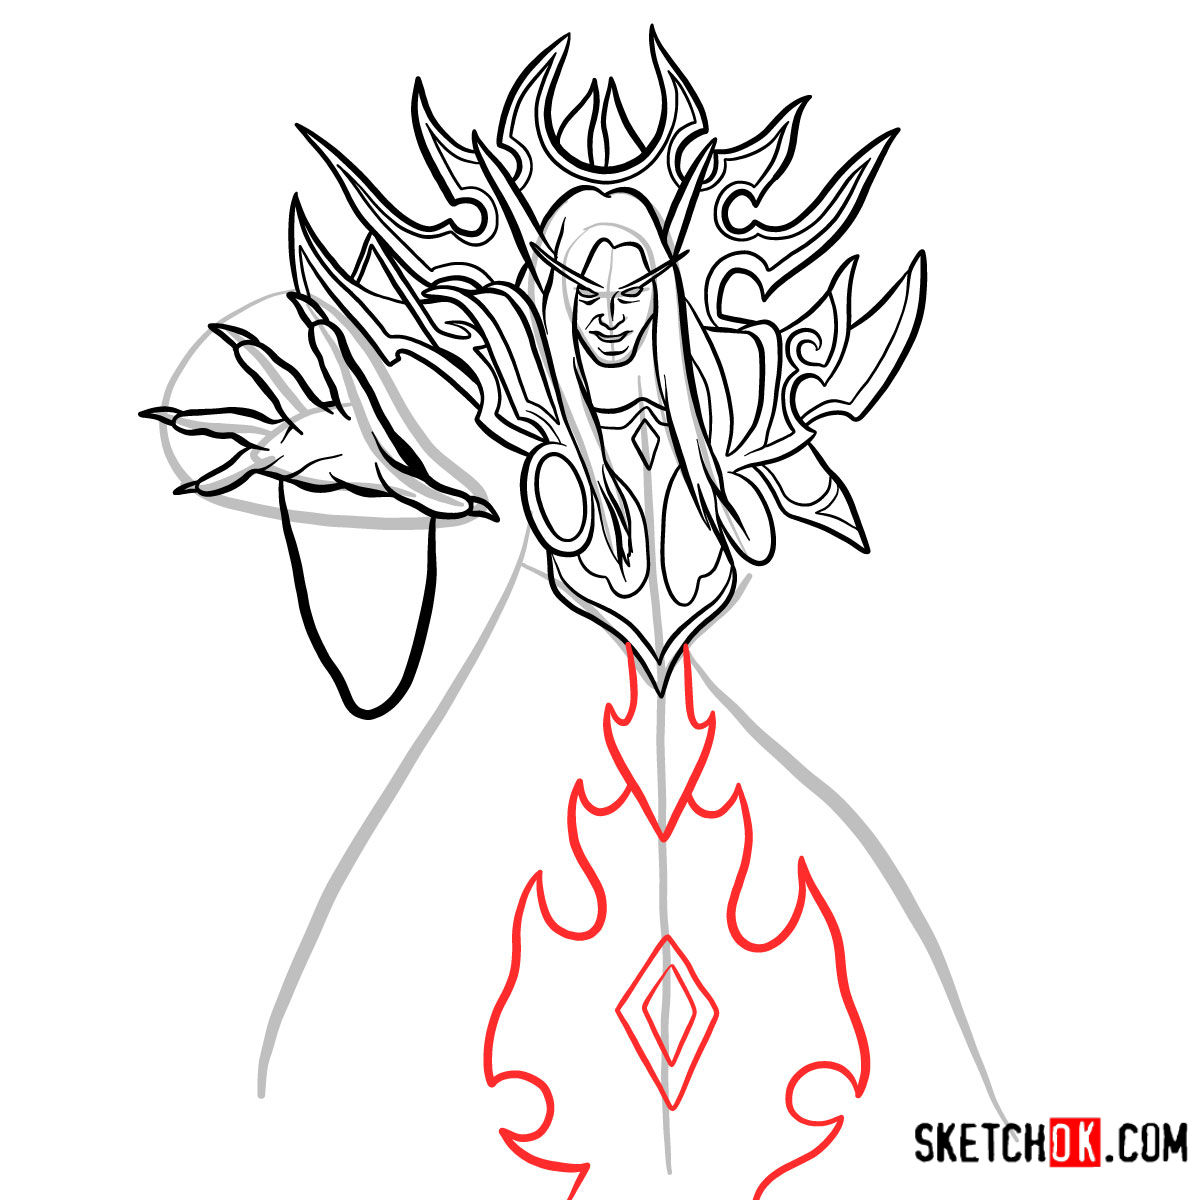 How to draw Kael'thas Sunstrider | World of Warcraft - step 11